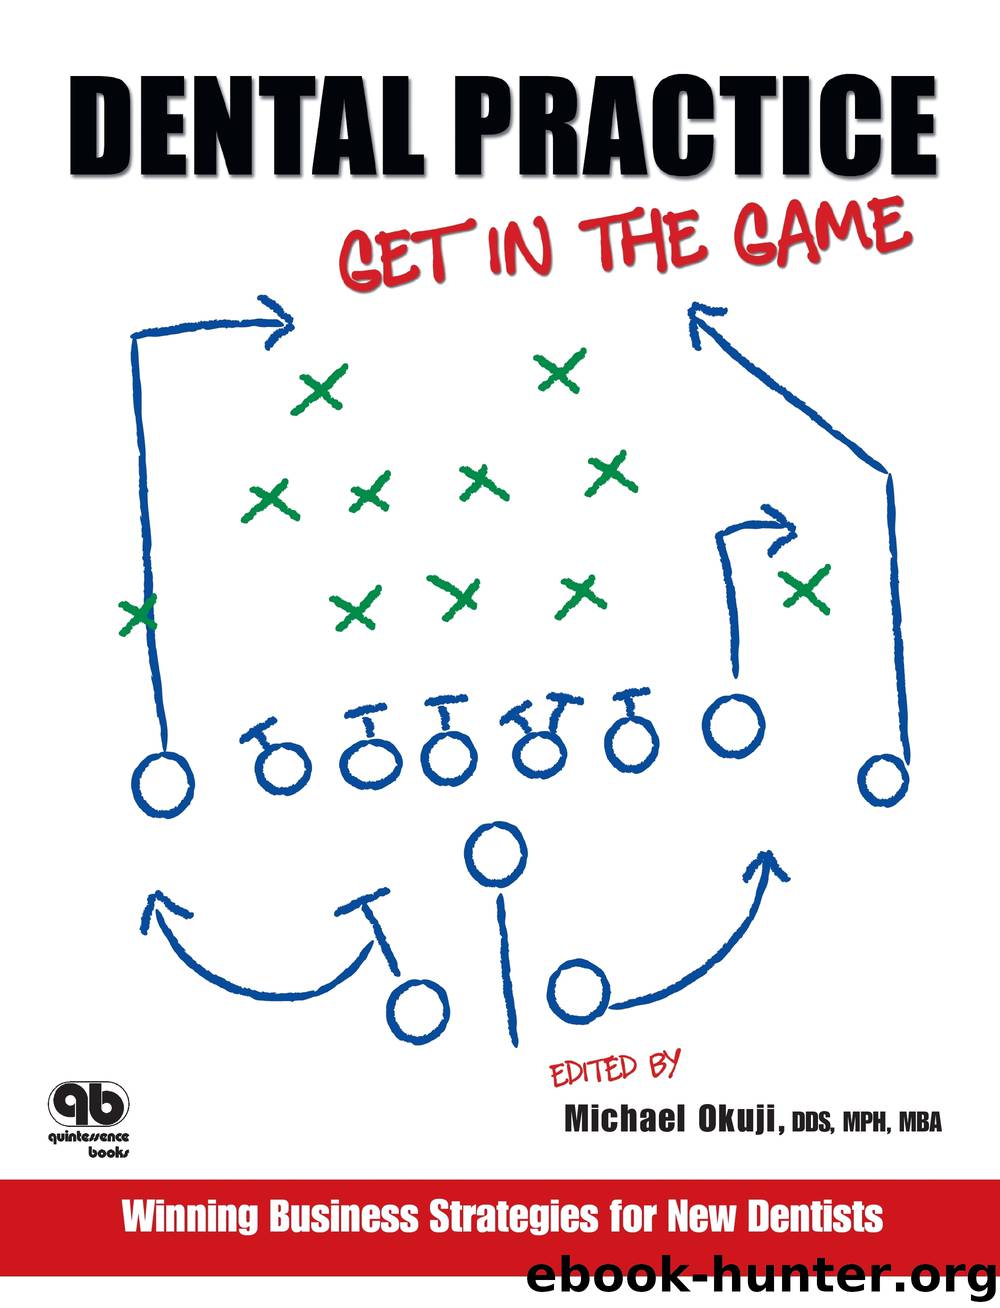 Dental Practice: Get in the Game by Michael Okuji